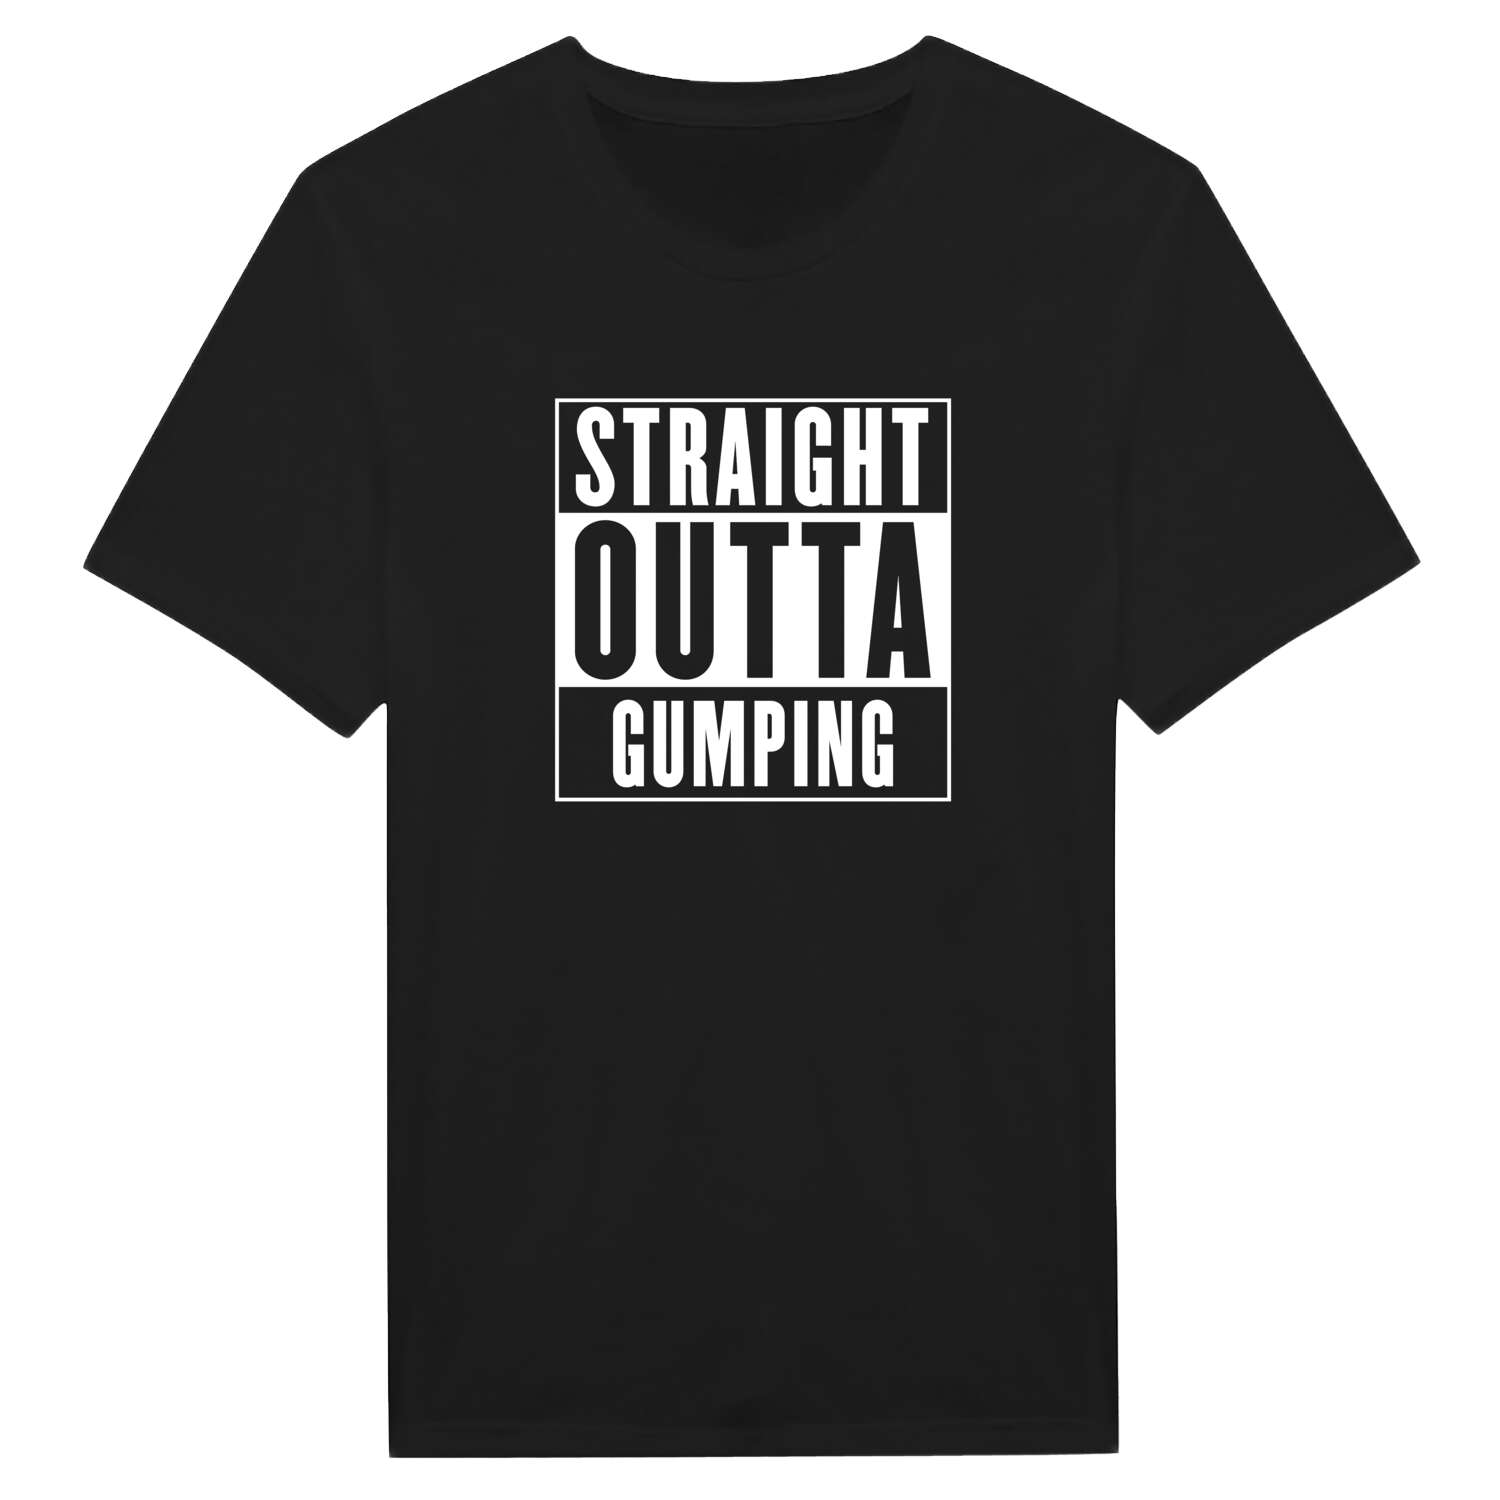 Gumping T-Shirt »Straight Outta«